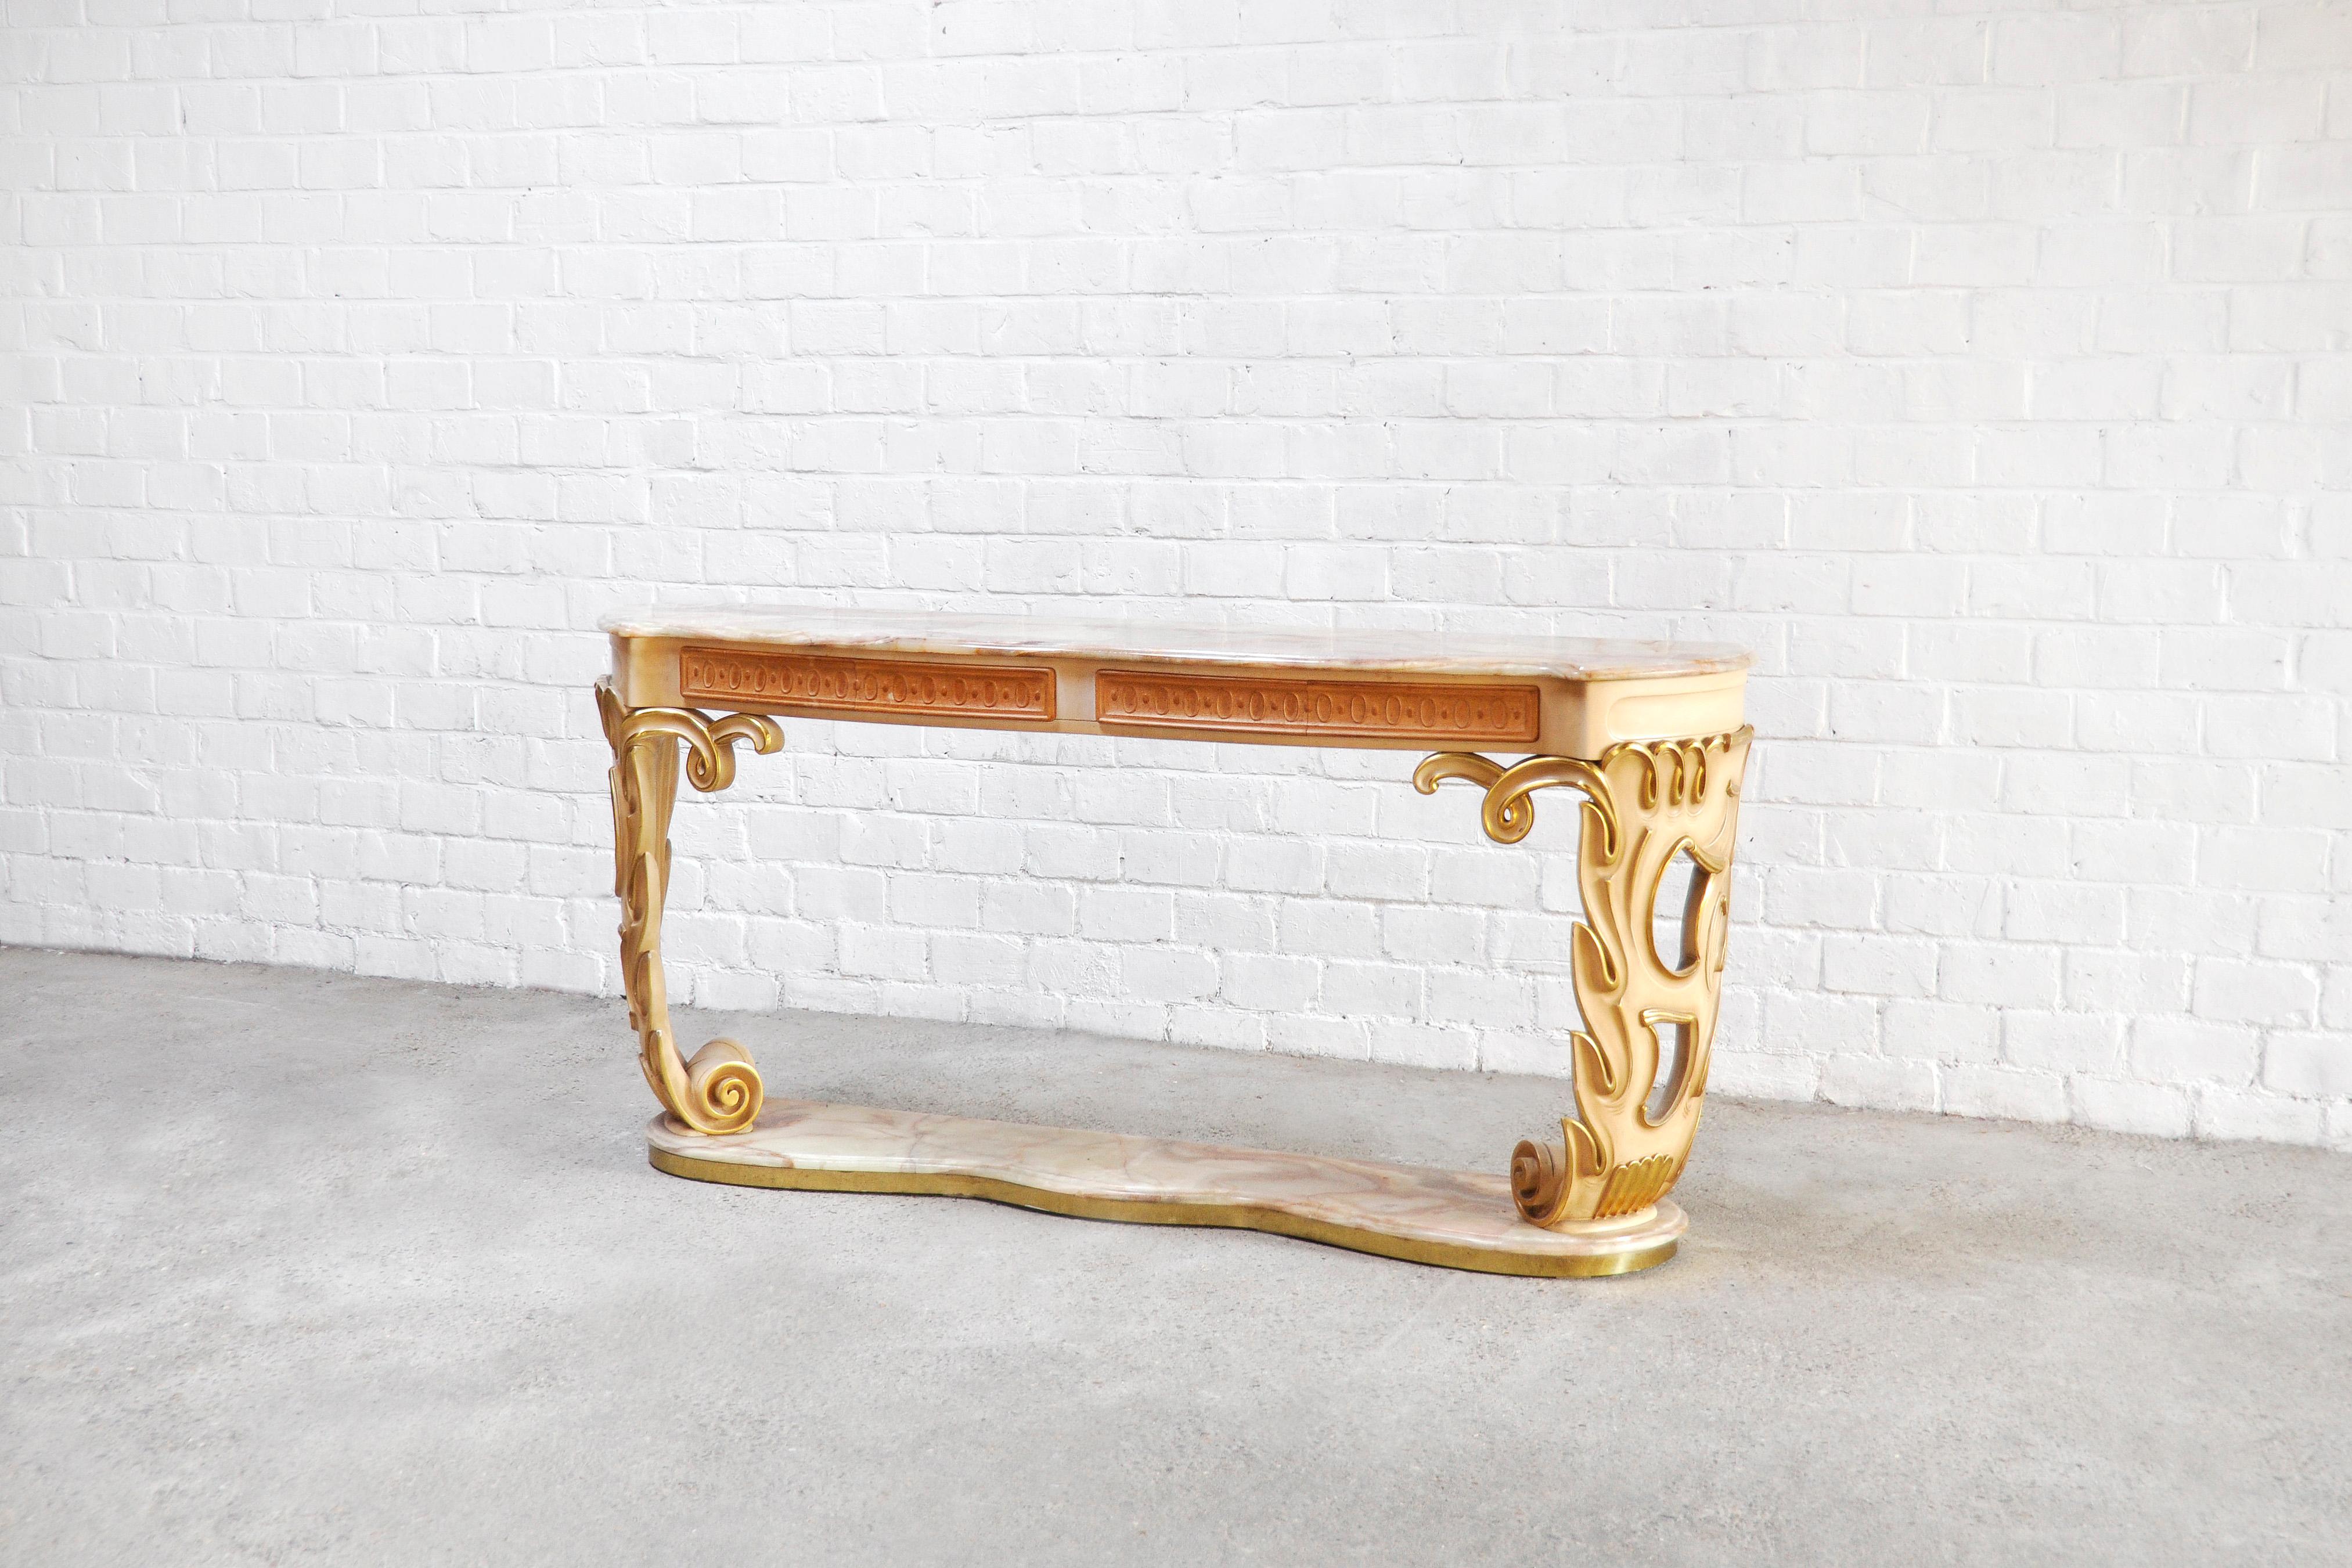 An impressive and large Italian console in lacquered and gilded carved wood. Finished with a large top and base in onyx. Under the onyx top are four drawers for storage. This unique console presents very fine details and a high production quality.